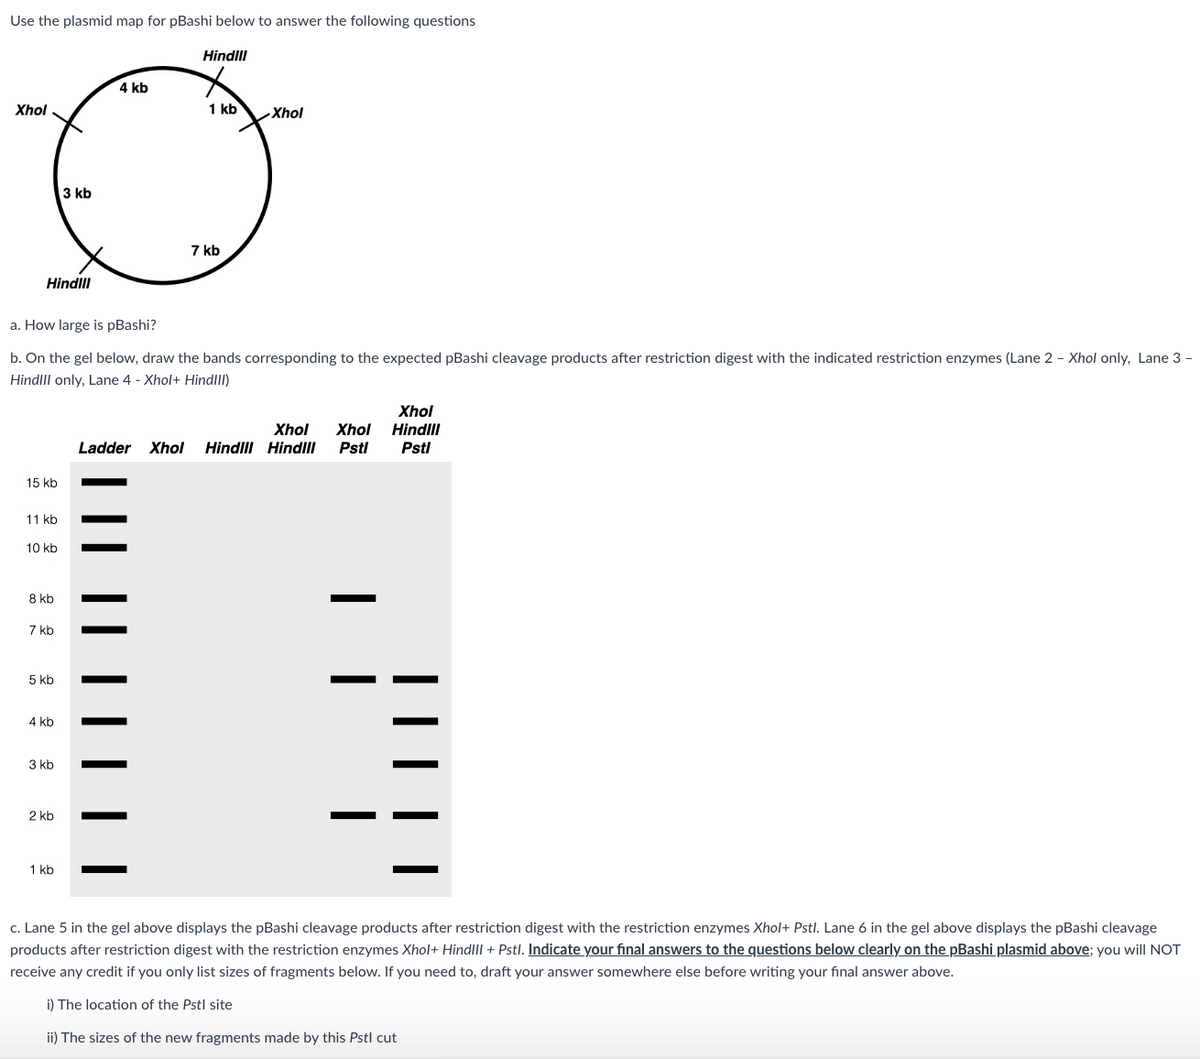 Use the plasmid map for pBashi below to answer the following questions
Xhol
Hind!!!
15 kb
11 kb
10 kb
8 kb
7 kb
5 kb
a. How large is pBashi?
b. On the gel below, draw the bands corresponding to the expected pBashi cleavage products after restriction digest with the indicated restriction enzymes (Lane 2 - Xhol only, Lane 3 -
HindIII only, Lane 4 - Xhol+ HindIII)
4 kb
3 kb
3 kb
2 kb
1 kb
4 kb
Hindill
1 kb
7 kb
Xhol
Xhol
Xhol Xhol
Hind!!!
Ladder Xhol Hindill Hind!!! Pstl Pstl
c. Lane 5 in the gel above displays the pBashi cleavage products after restriction digest with the restriction enzymes Xhol+ Pstl. Lane 6 in the gel above displays the pBashi cleavage
products after restriction digest with the restriction enzymes Xhol+ HindIII + Pstl. Indicate your final answers to the questions below clearly on the pBashi plasmid above; you will NOT
receive any credit if you only list sizes of fragments below. If you need to, draft your answer somewhere else before writing your final answer above.
i) The location of the Pstl site
ii) The sizes of the new fragments made by this Pstl cut